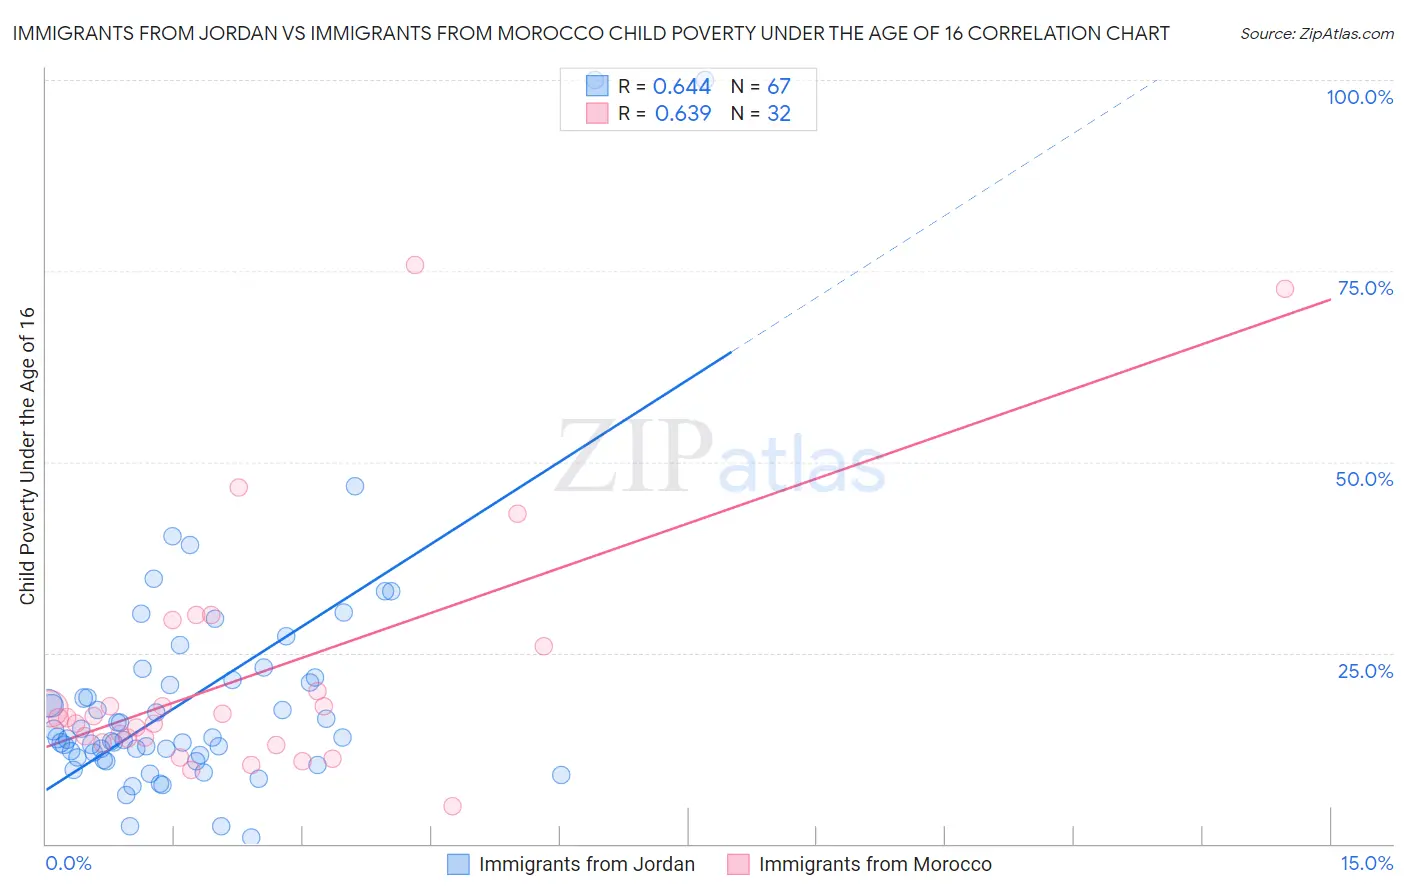 Immigrants from Jordan vs Immigrants from Morocco Child Poverty Under the Age of 16